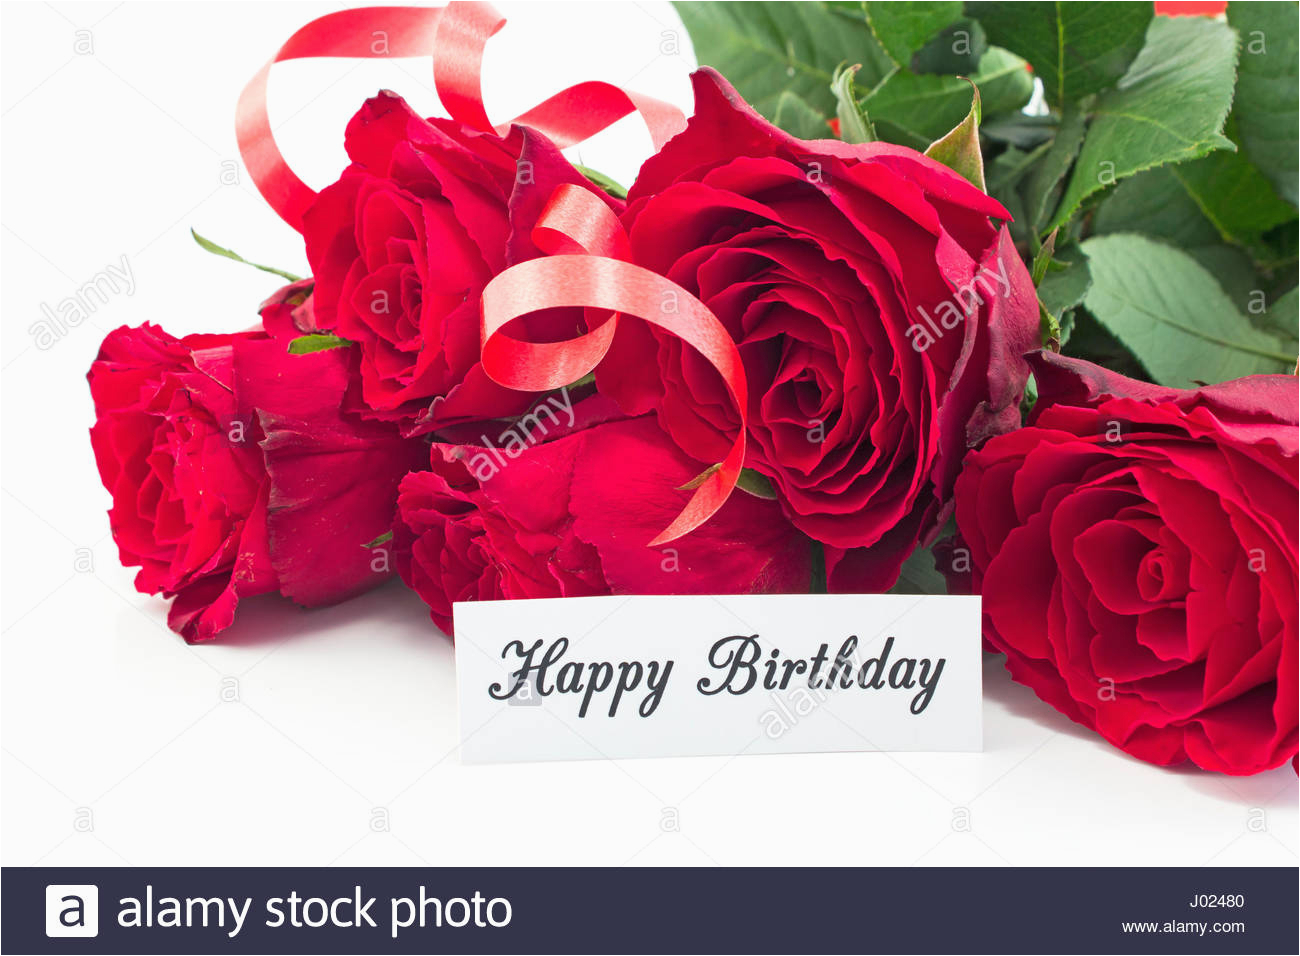 happy birthday card with bouquet of red roses on white